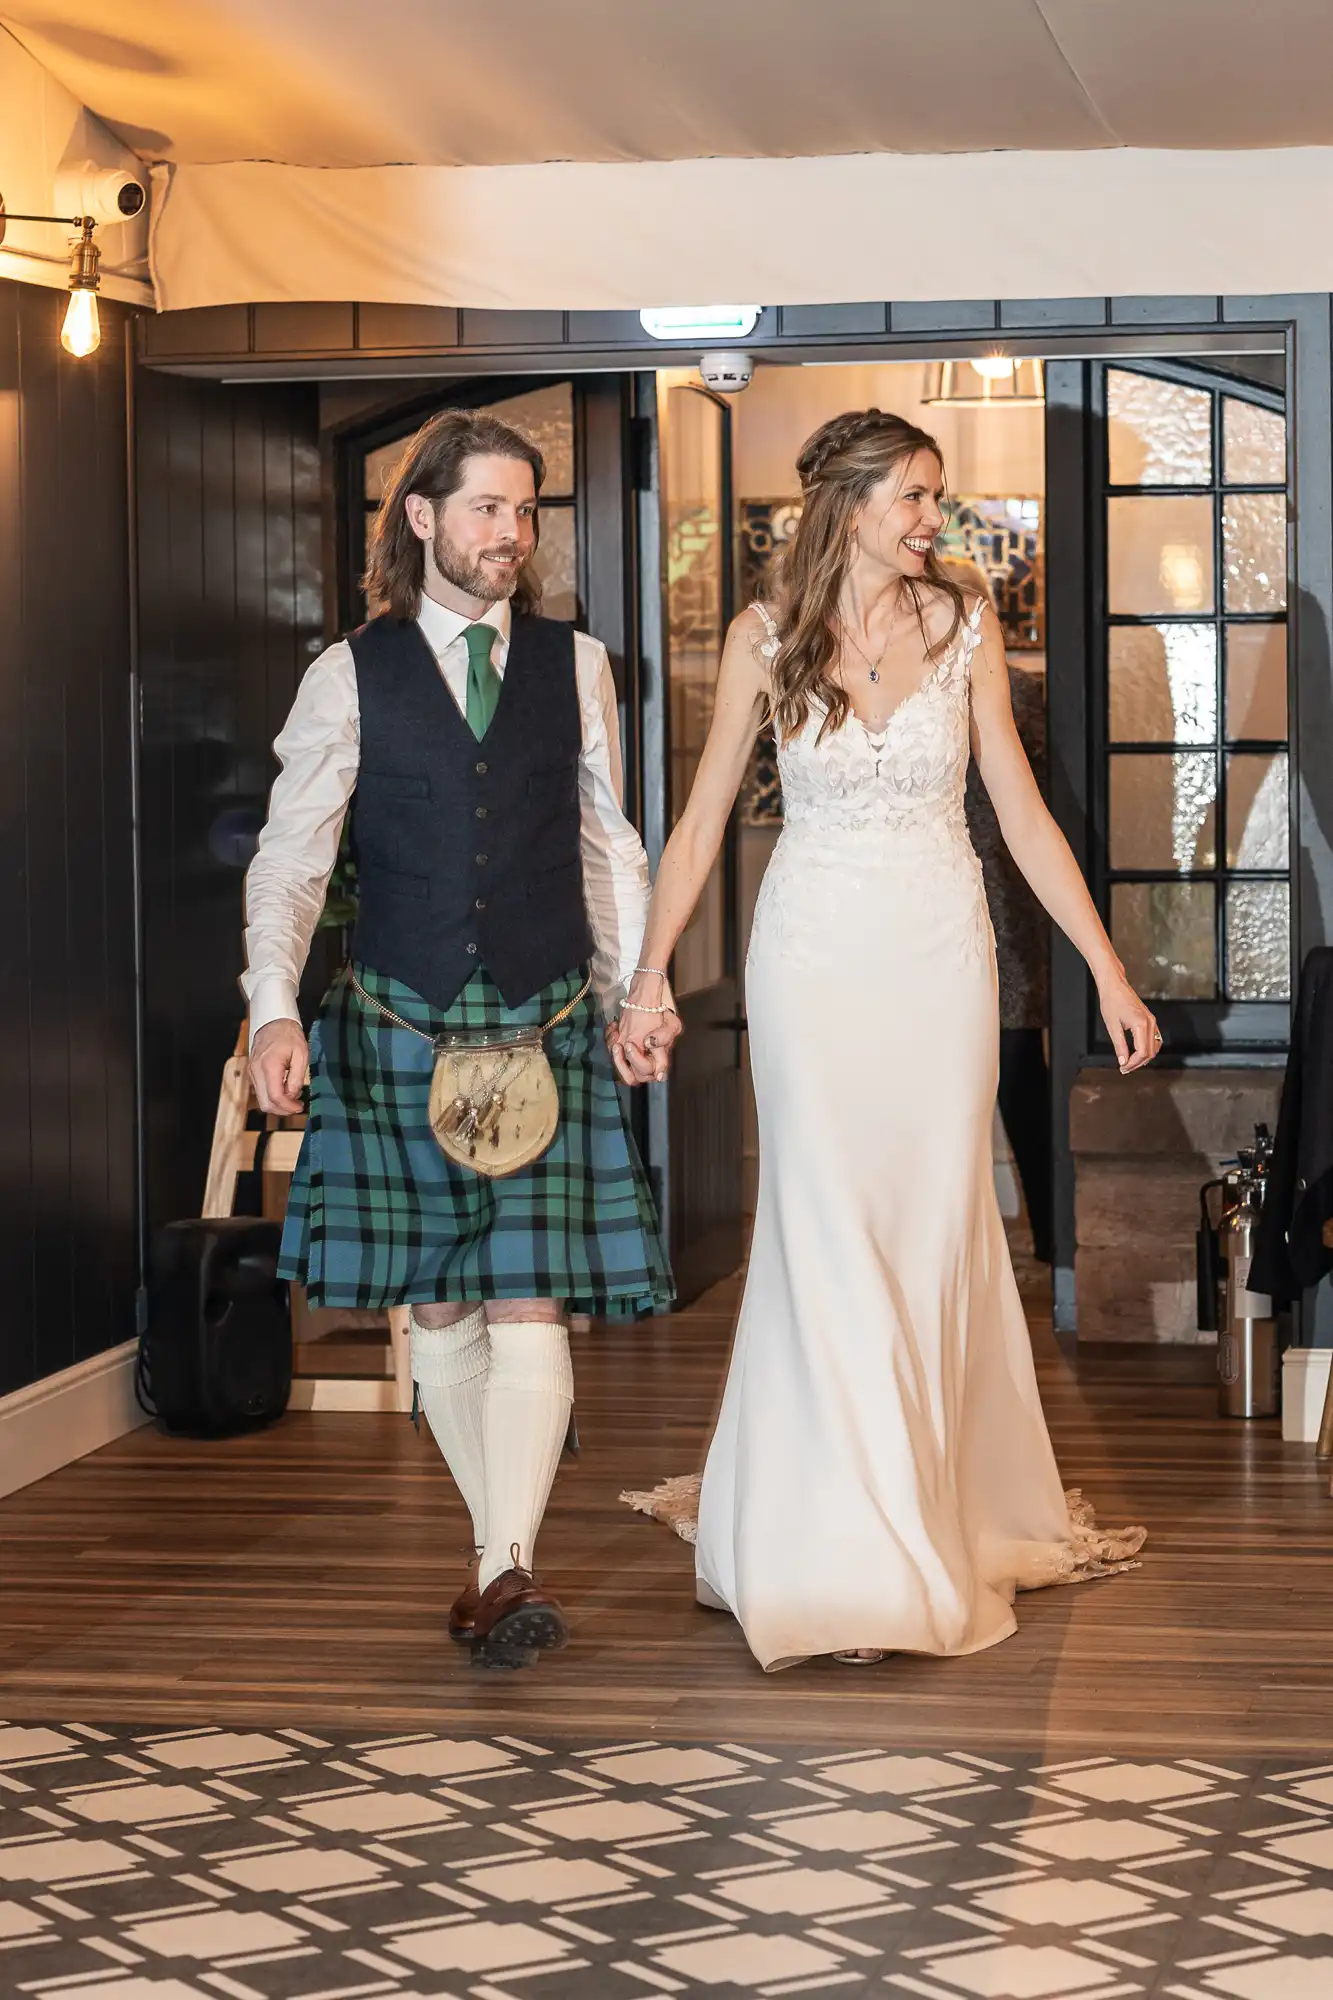 A couple, with the man in a kilt and the woman in a white dress, walk hand in hand through a doorway at an indoor event.